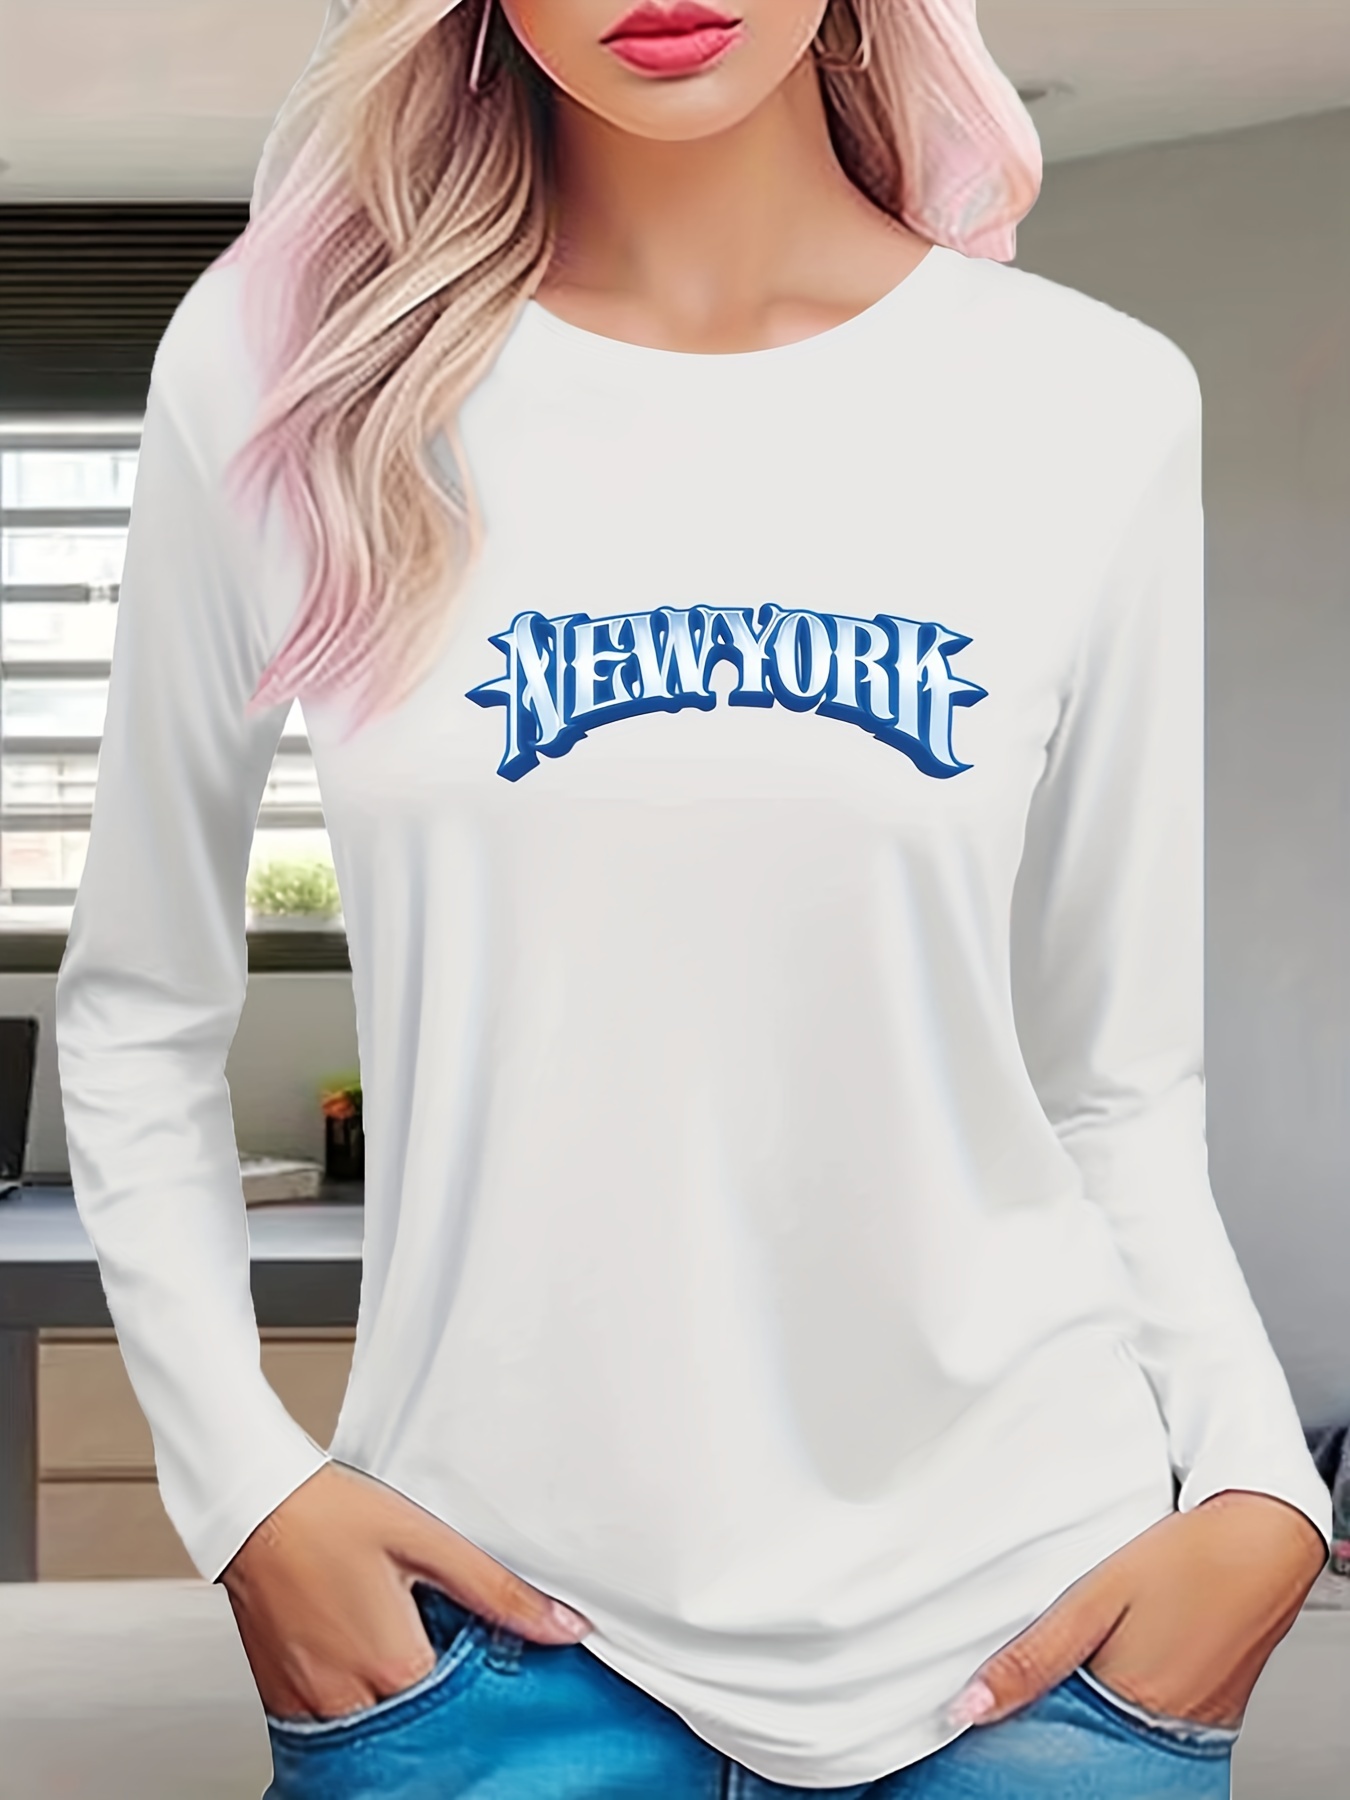 New York Print Crew Neck T-shirt, Casual Long Sleeve Top For